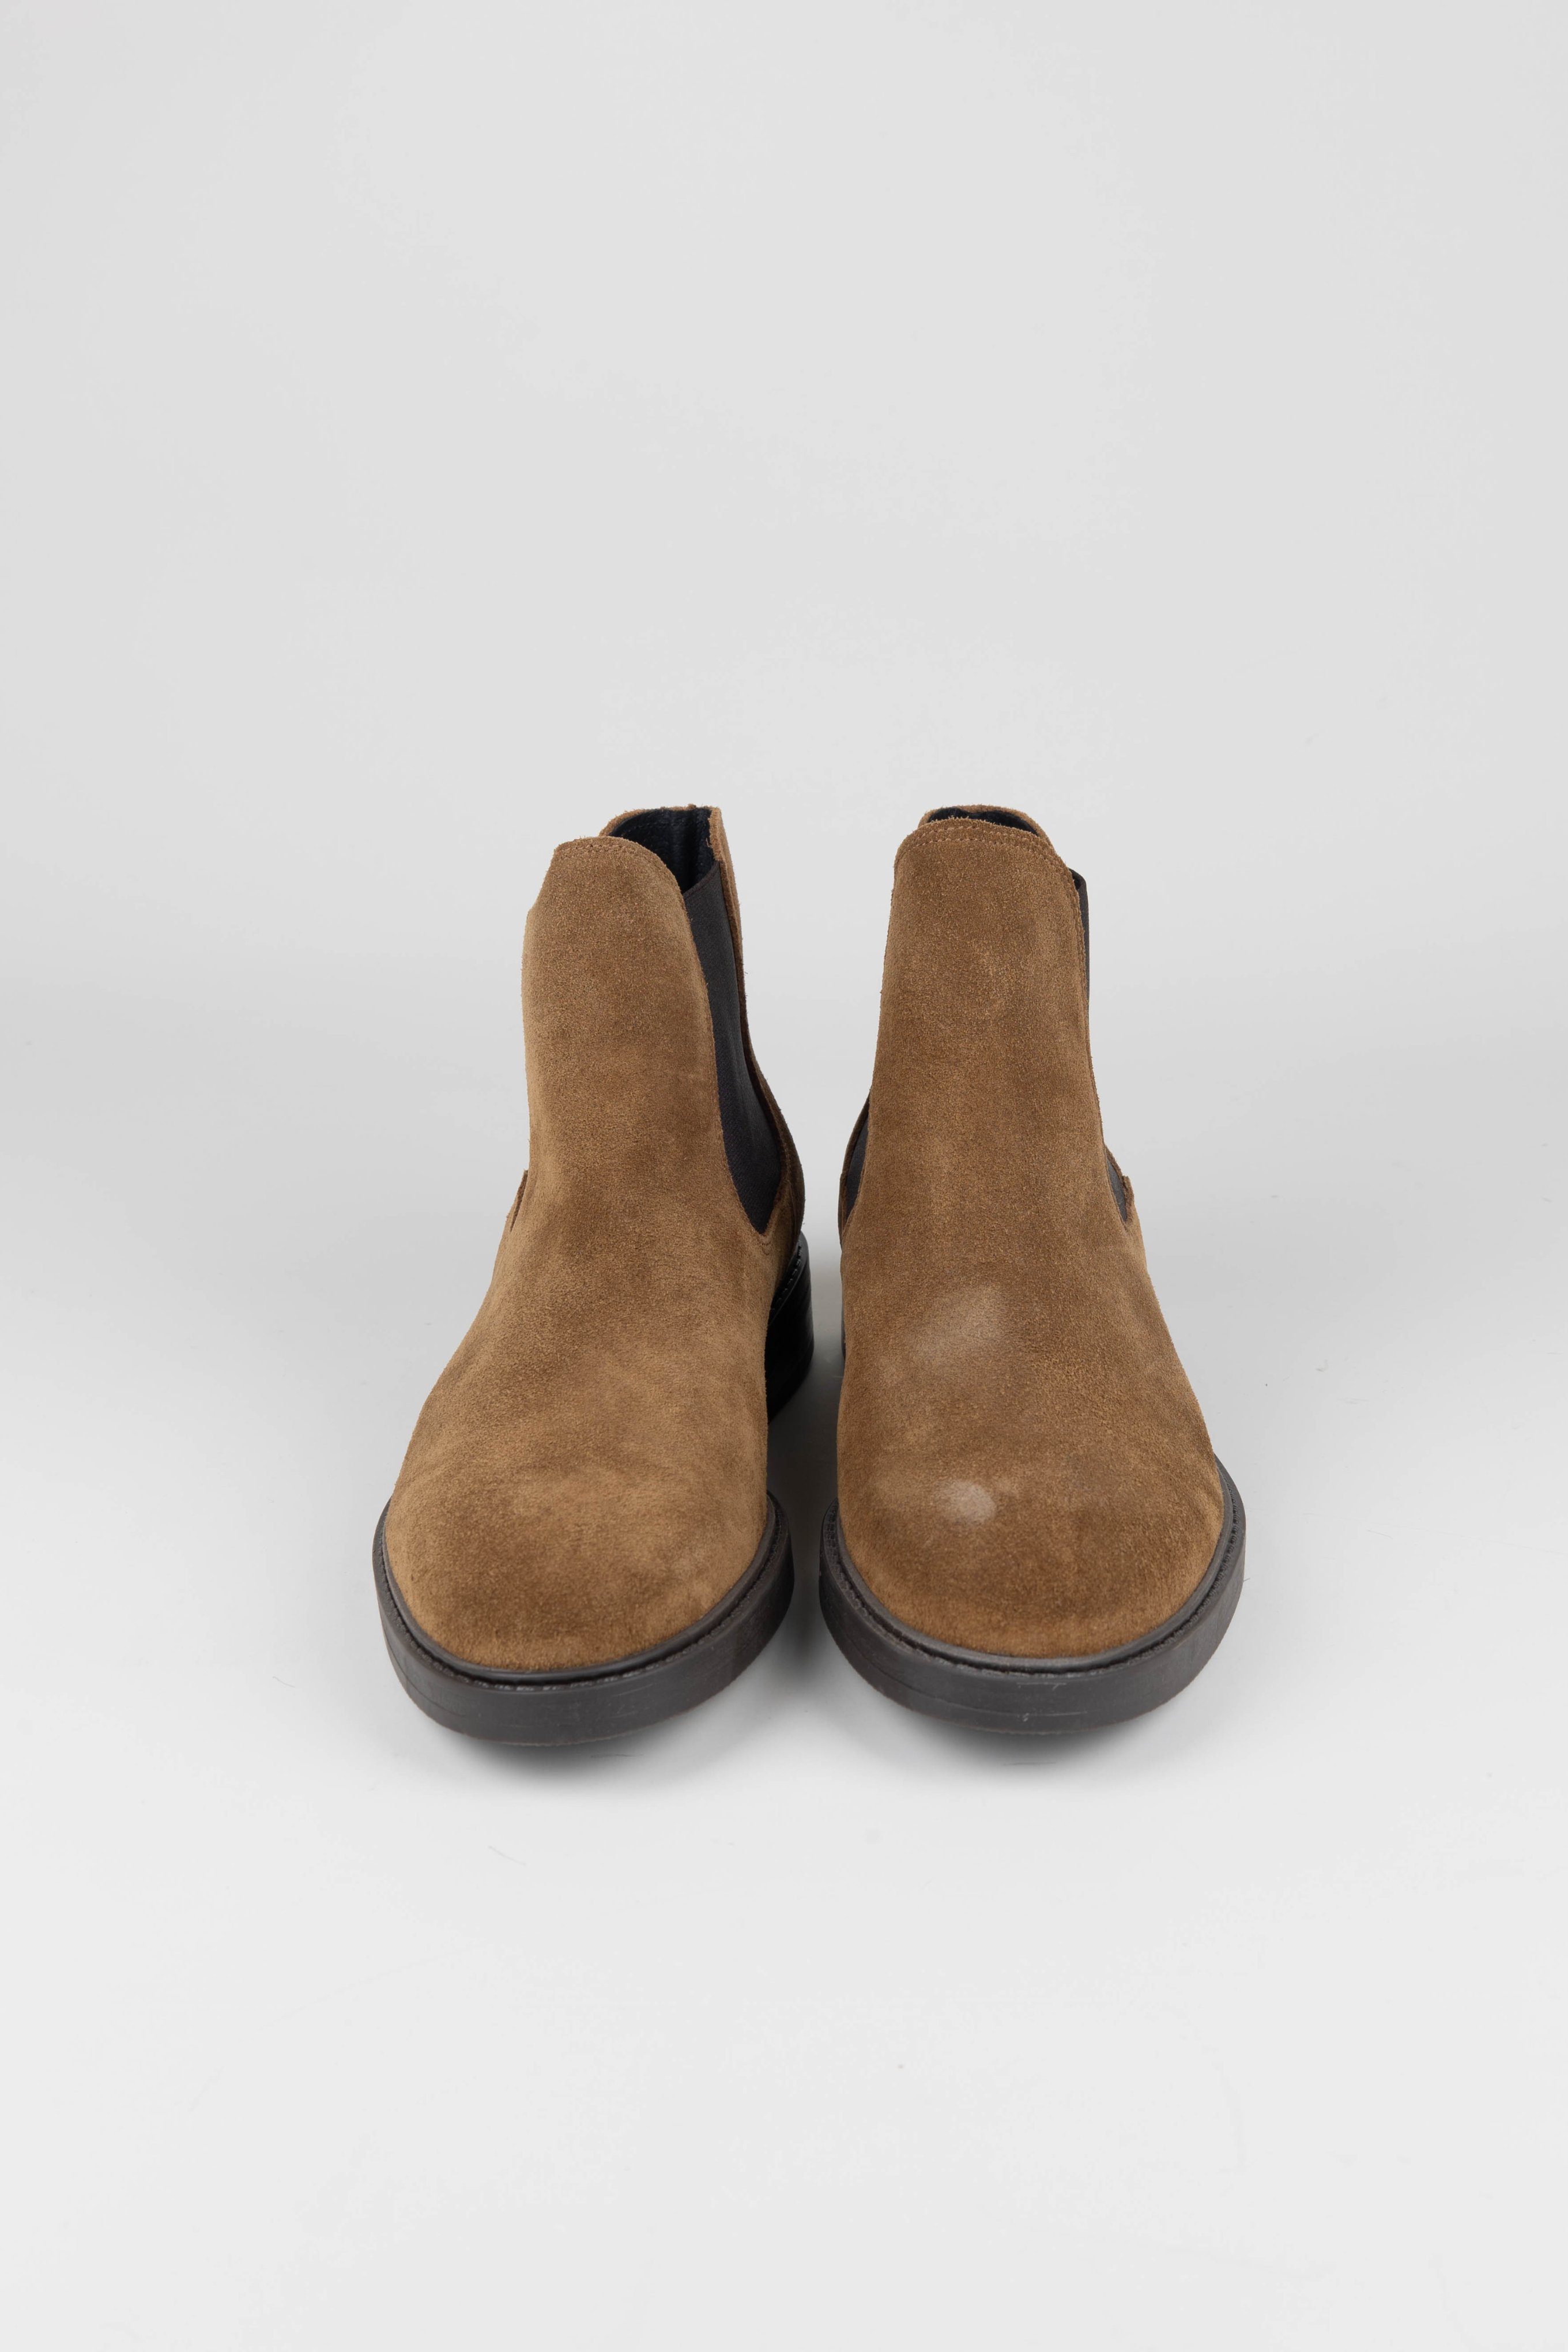 OU - SLHBLAKE SUEDE CHELSEA BOOTS MEN - TOBACCO BROWN